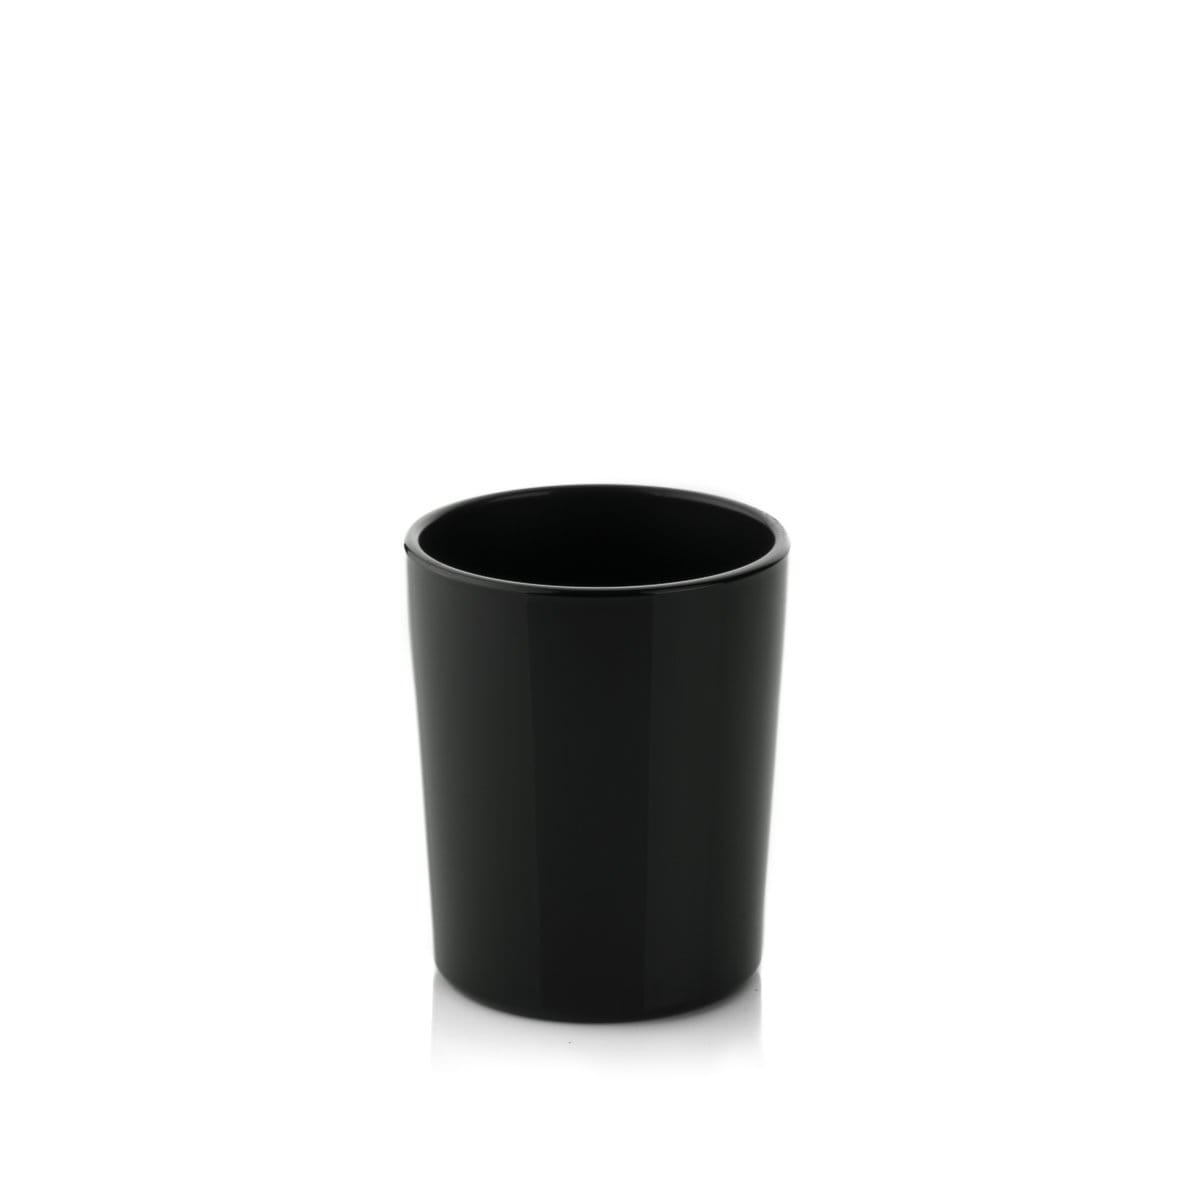 Candle Shack Candle Jar 9cl Lauren Candle Glass NEW - Externally Black Gloss